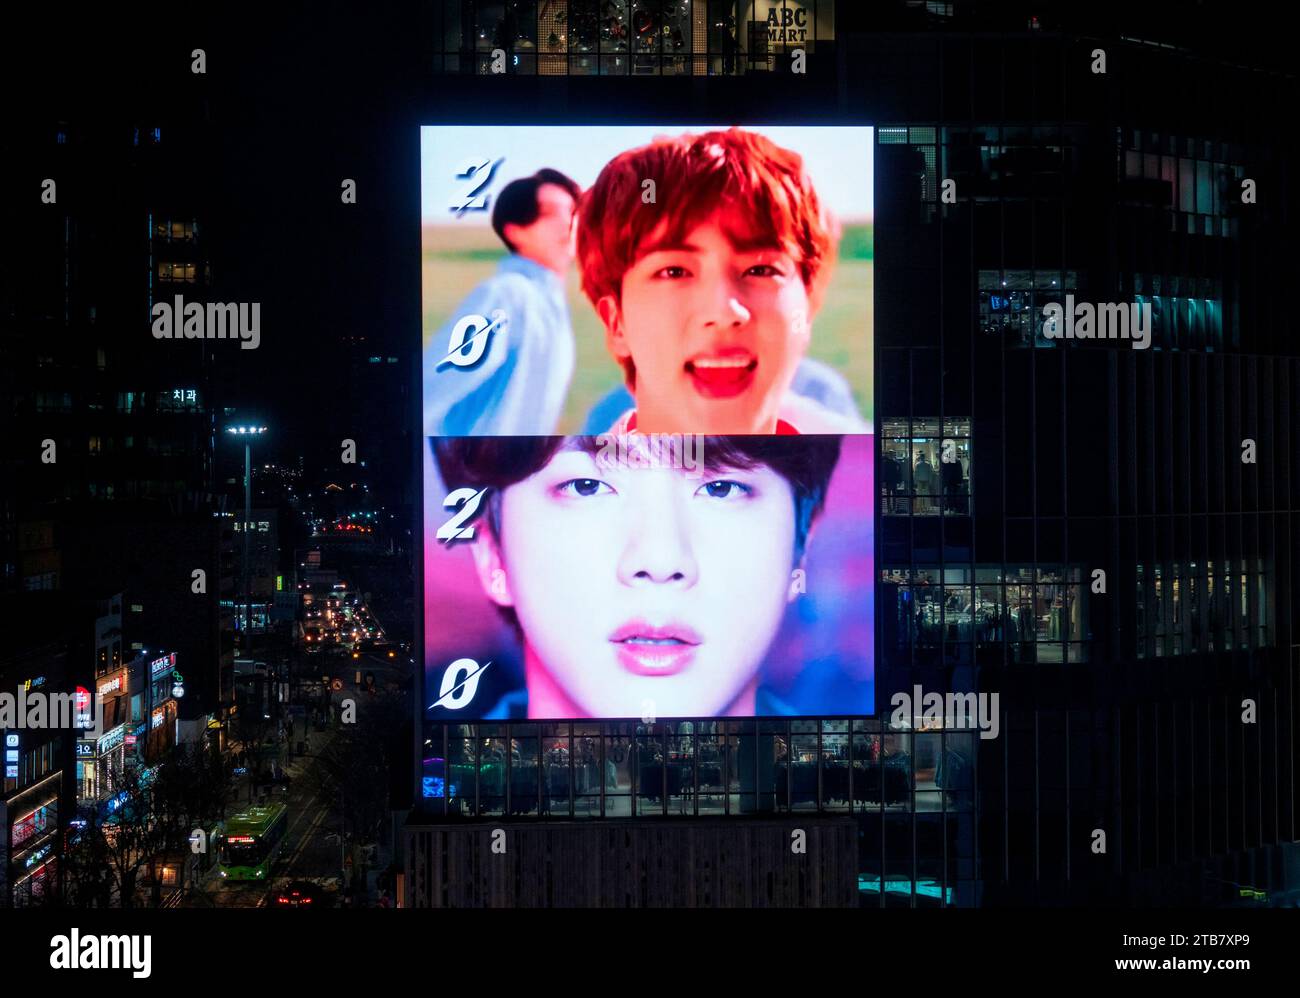 BTS Jin's birthday, Dec 4, 2023 : A birthday advertisement arranged by BTS member Jin's fans to celebrate his birthday is seen on a LED board of a department store building in central Seoul, South Korea. Jin turned 31 on Dec 4. Jin (Kim Seok-Jin) began his military service in December last year. He is now serving as a drill instructor at an Army boot camp. All able-bodied men are required to serve in the military for 18 months in South Korea which is technically still at war with North Korea as the 1950-53 Korean War ended with a truce, not a peace treaty. (Photo by Lee Jae-Won/AFLO) Stock Photo